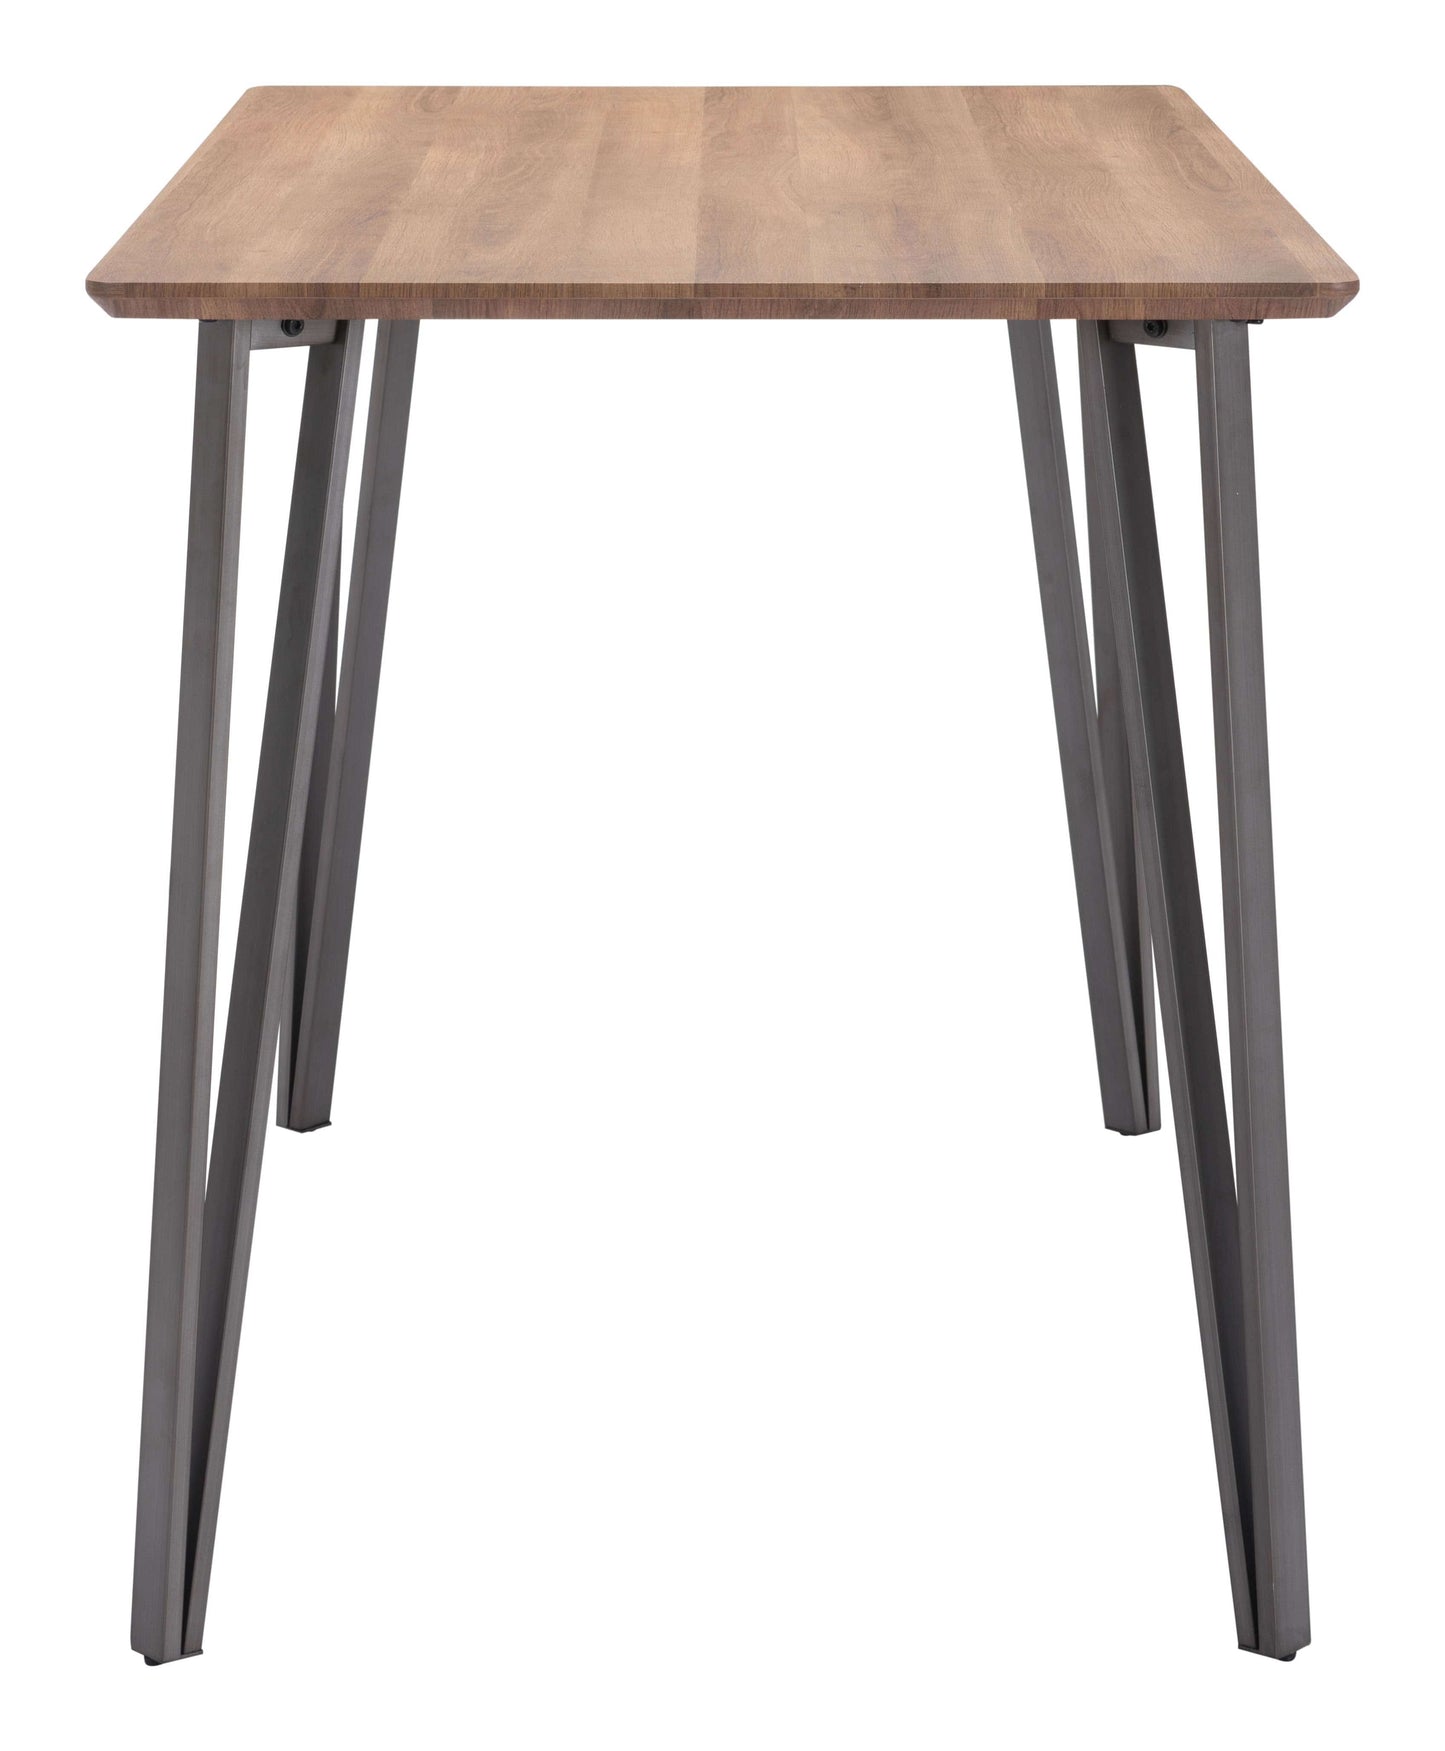 Side View of Doubs Bar Height Table